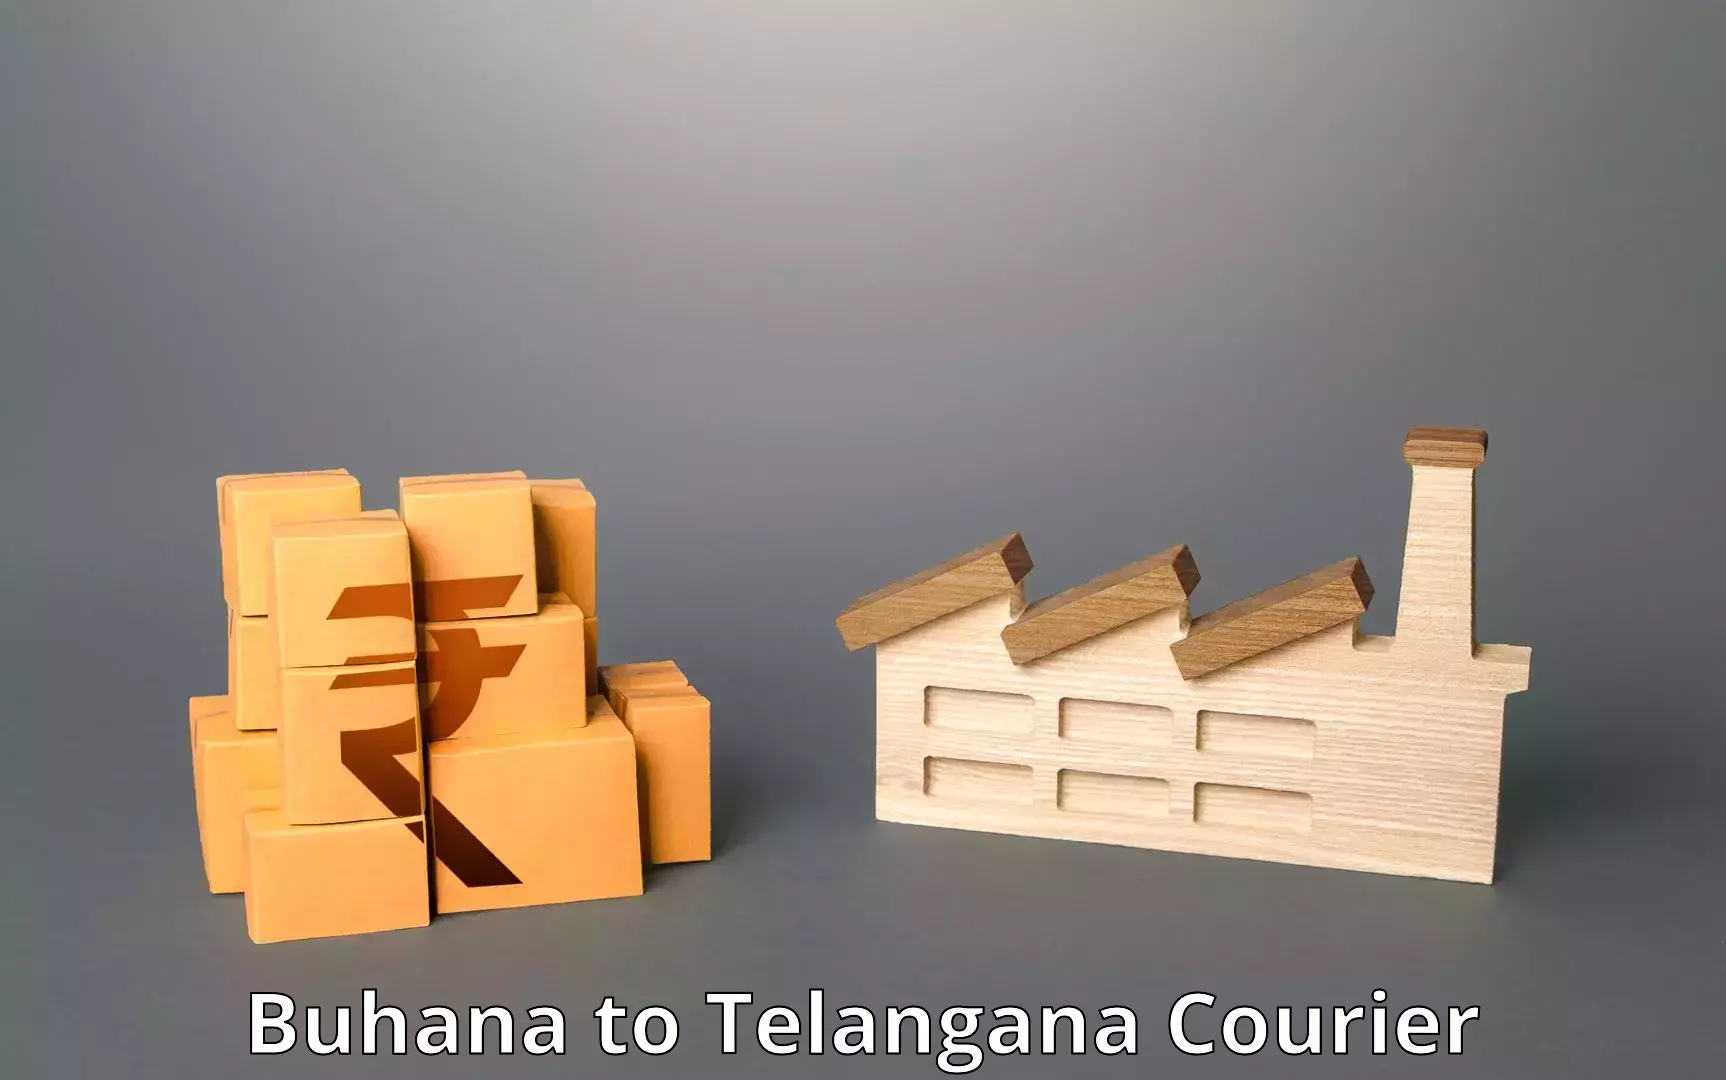 State-of-the-art courier technology Buhana to Telangana